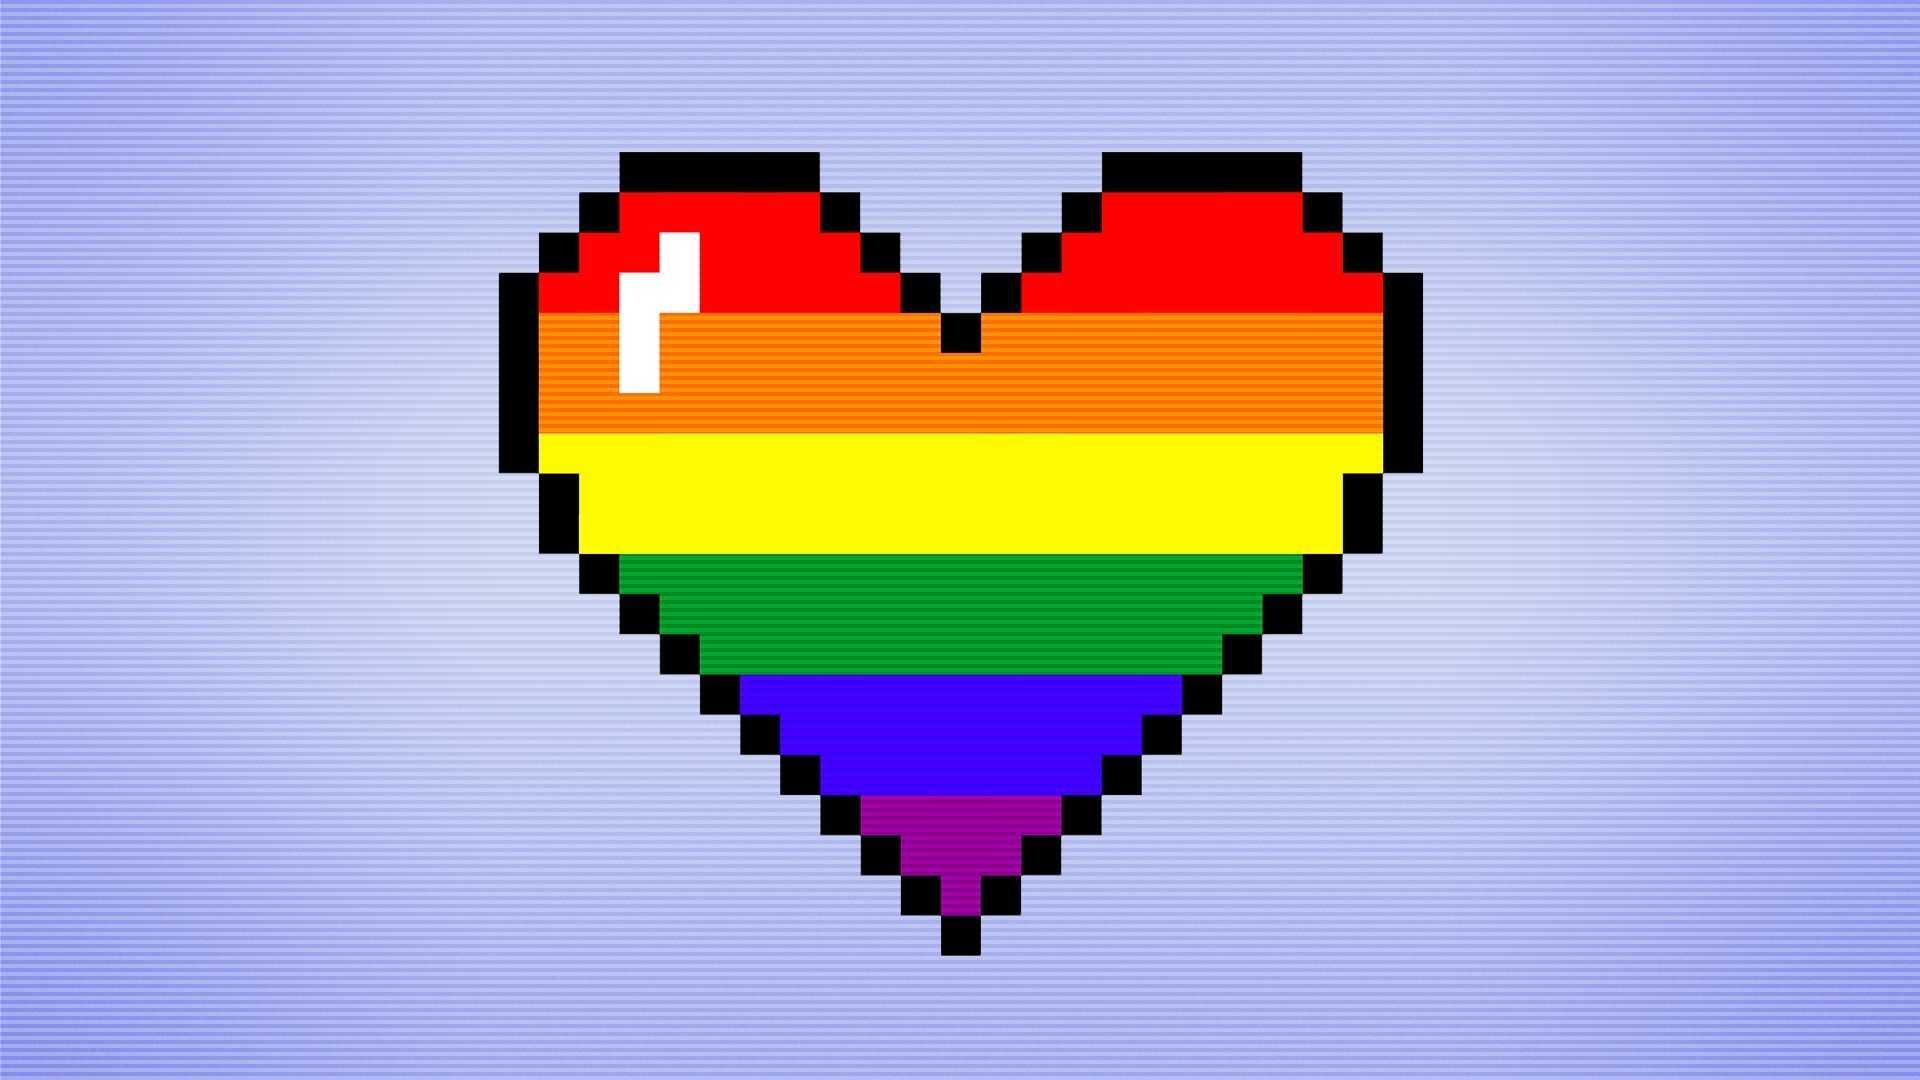 Illustration of a rainbow-striped pixelated heart icon on a computer screen